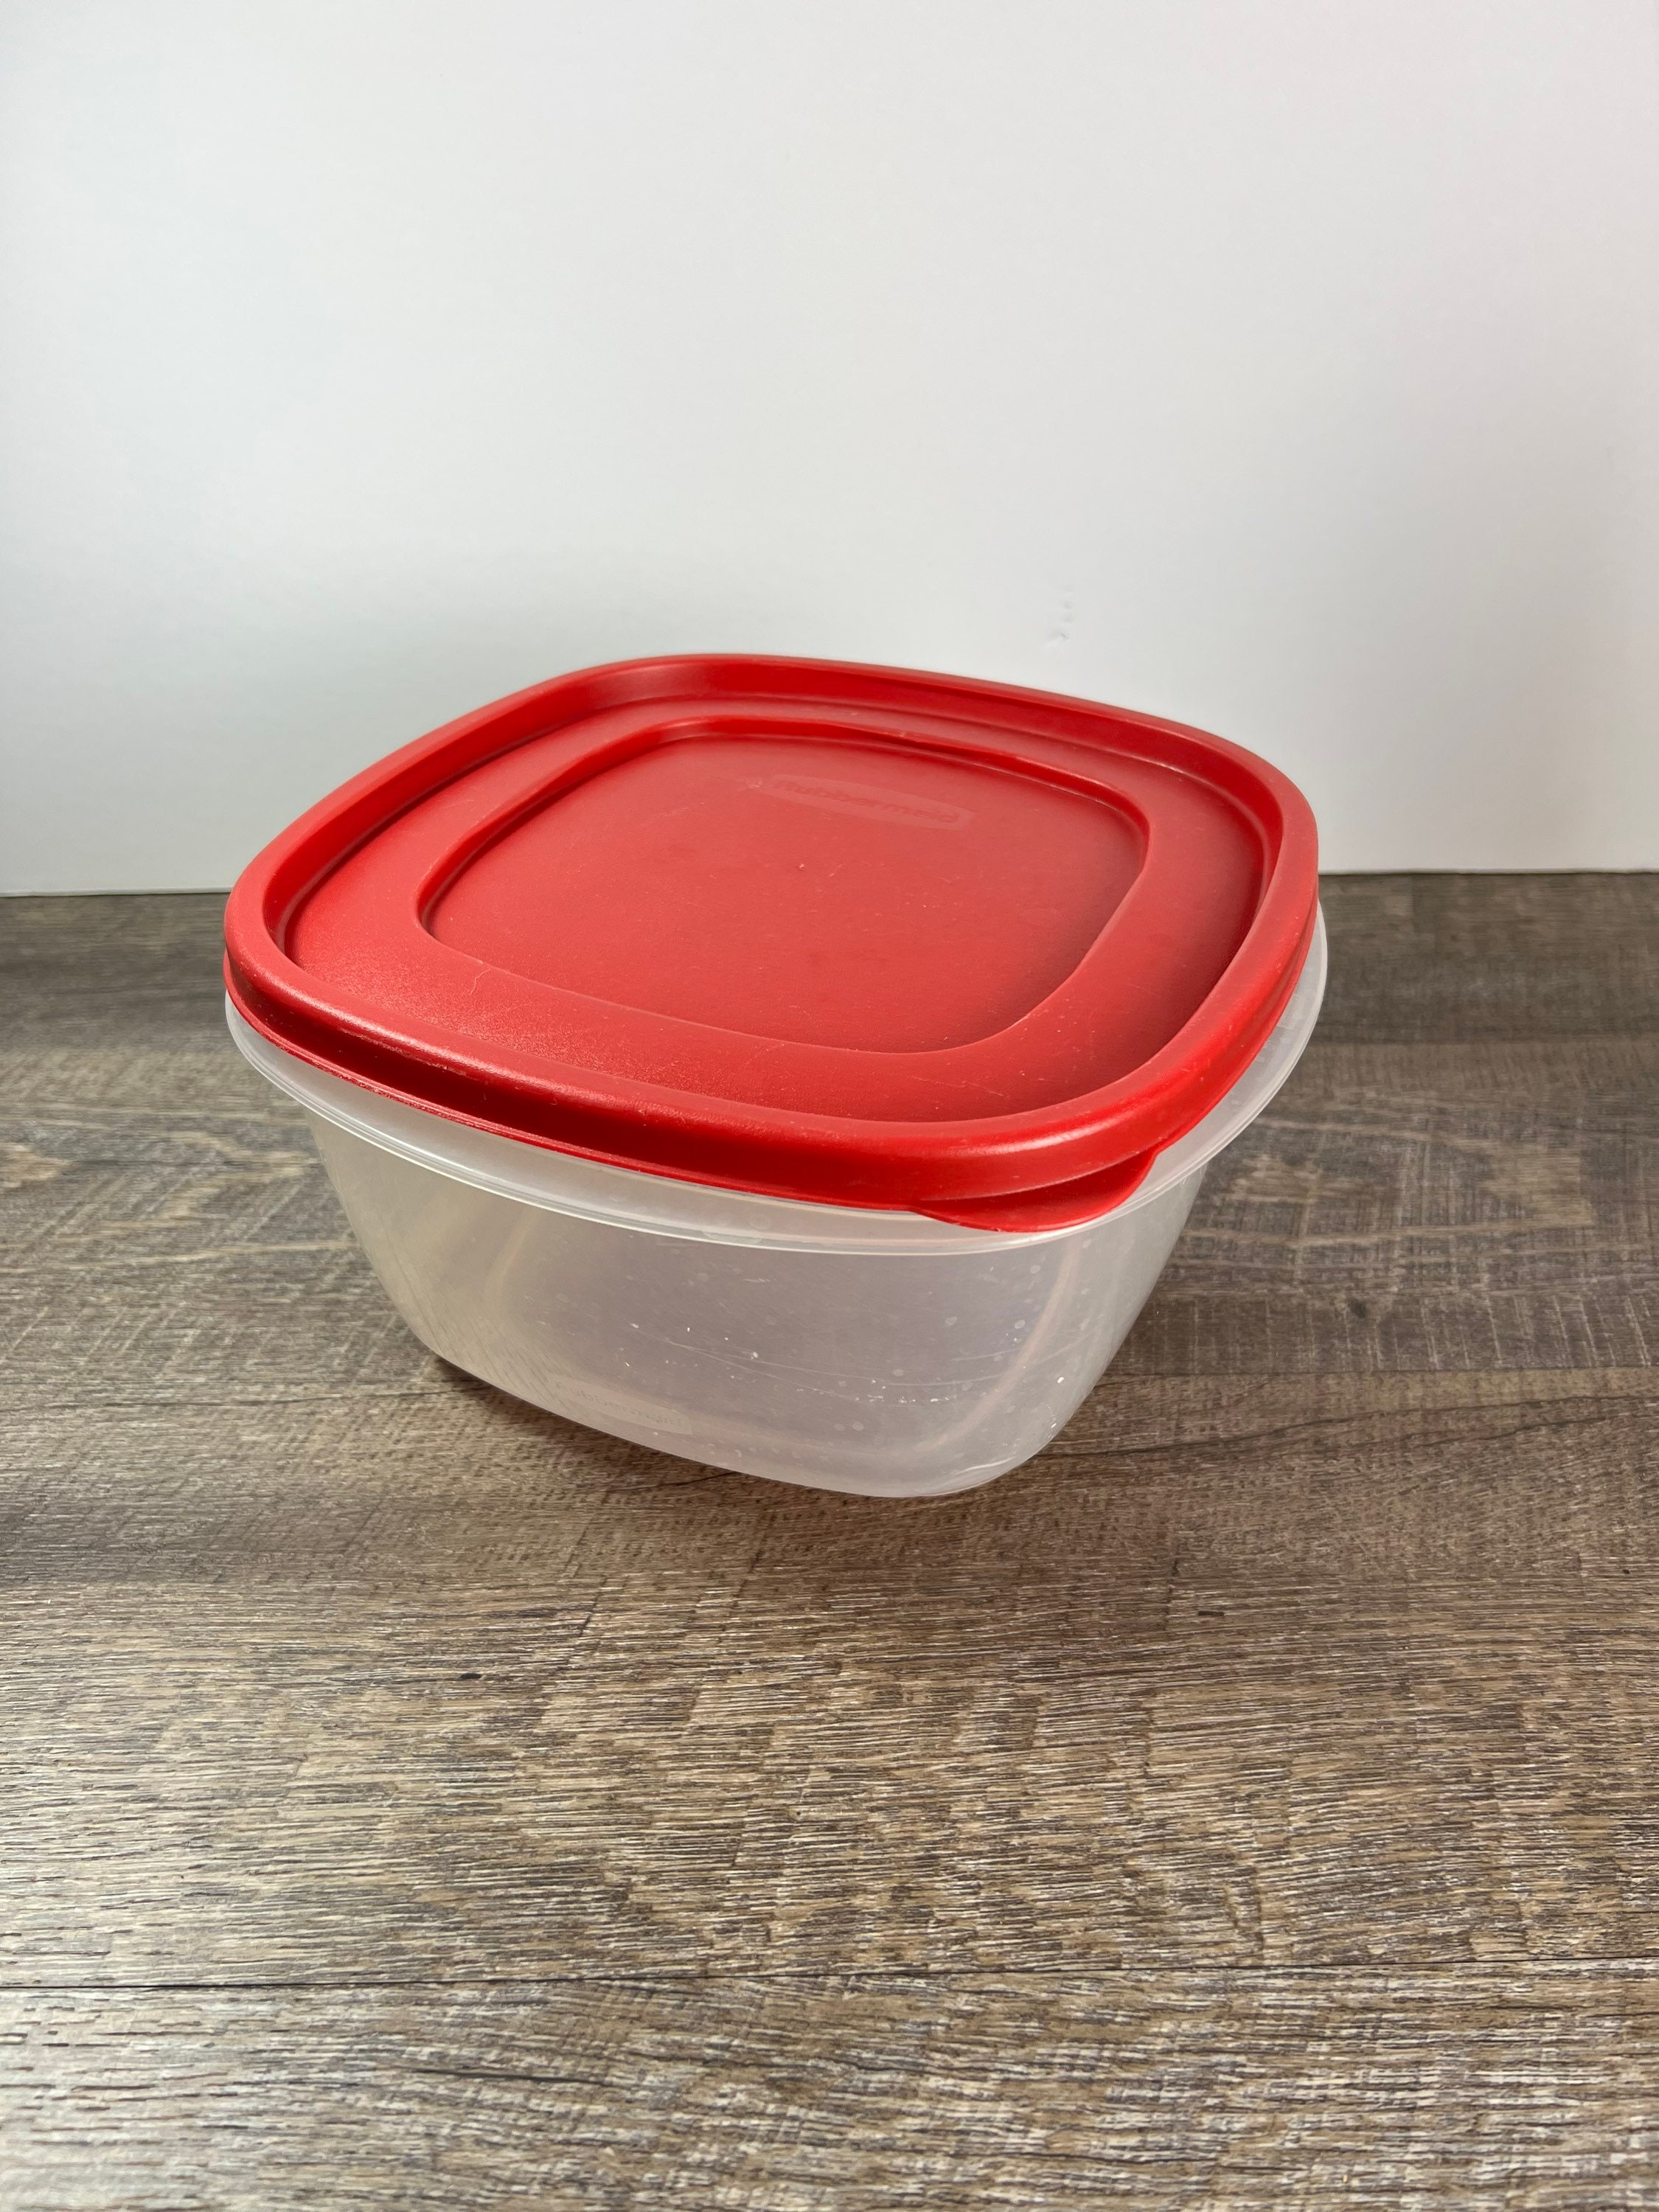 Rubbermaid Microwave Servin Saver Dishes: 4 Oz Bowl, Lid I, or Divided Oval  Dish / Lid V Oven Safe Plastic Containers Mauve Pink Blue Gray 